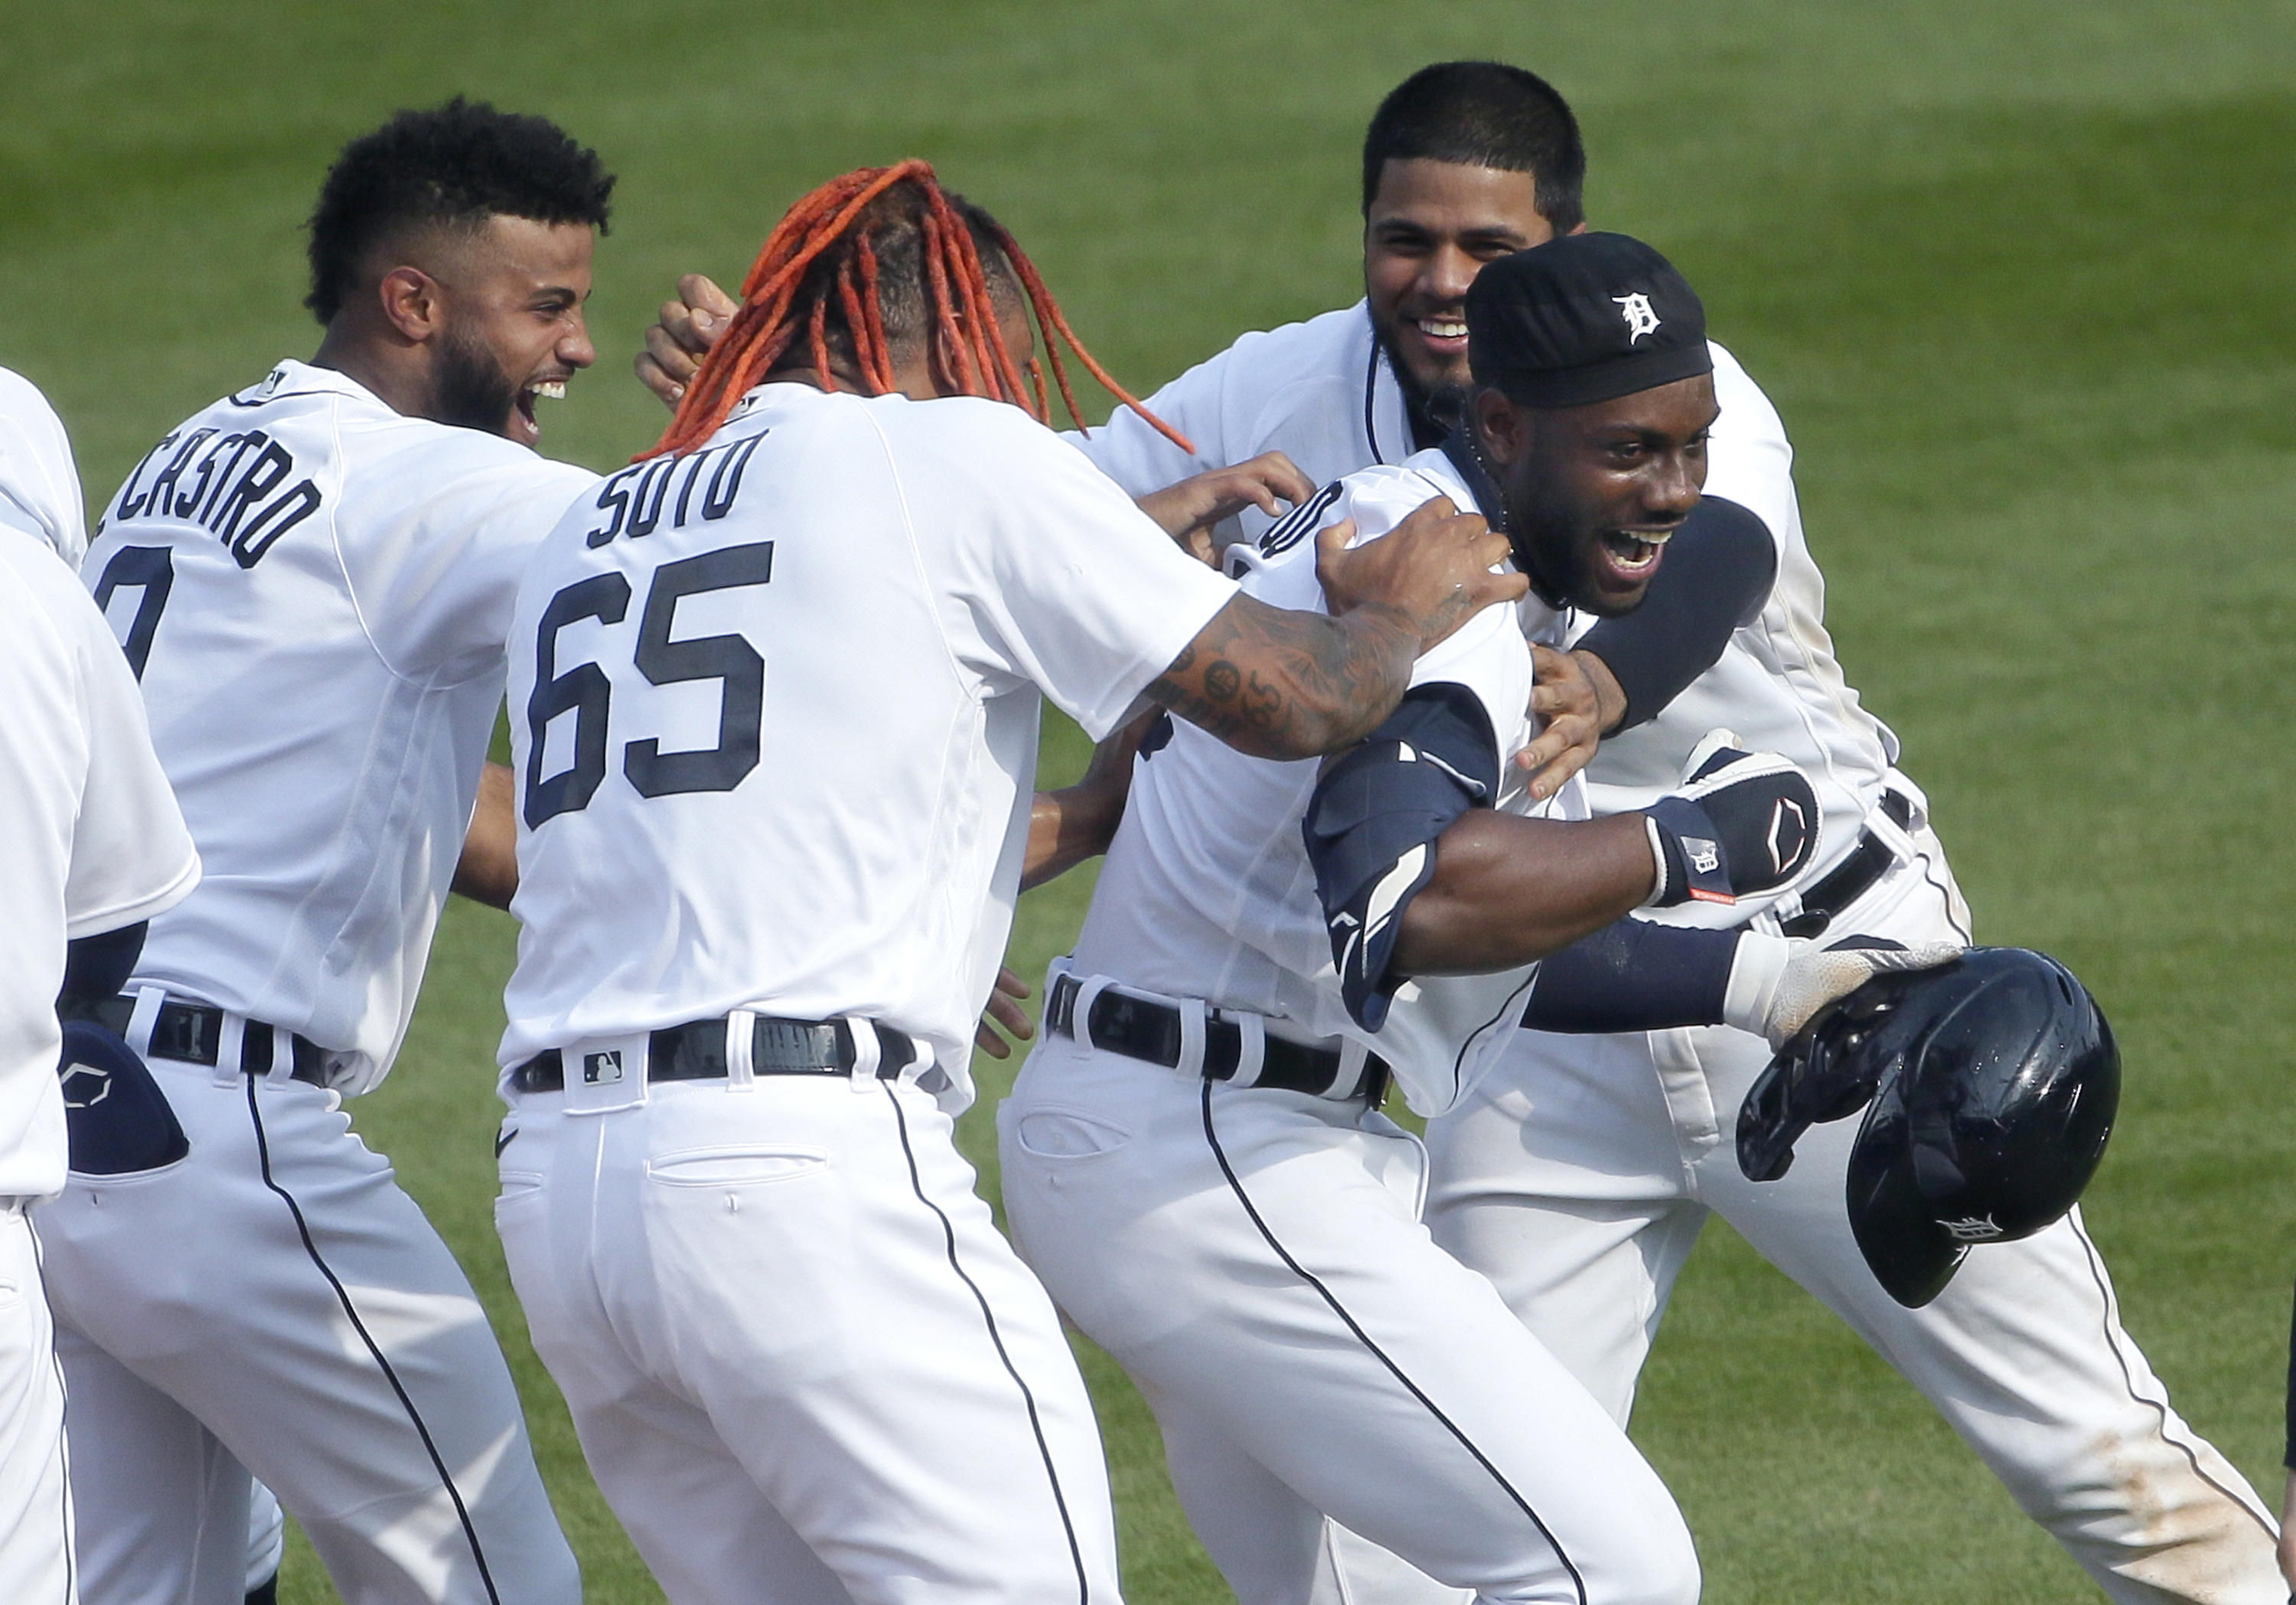 Detroit Tigers: The day we will see Tigers baseball this season